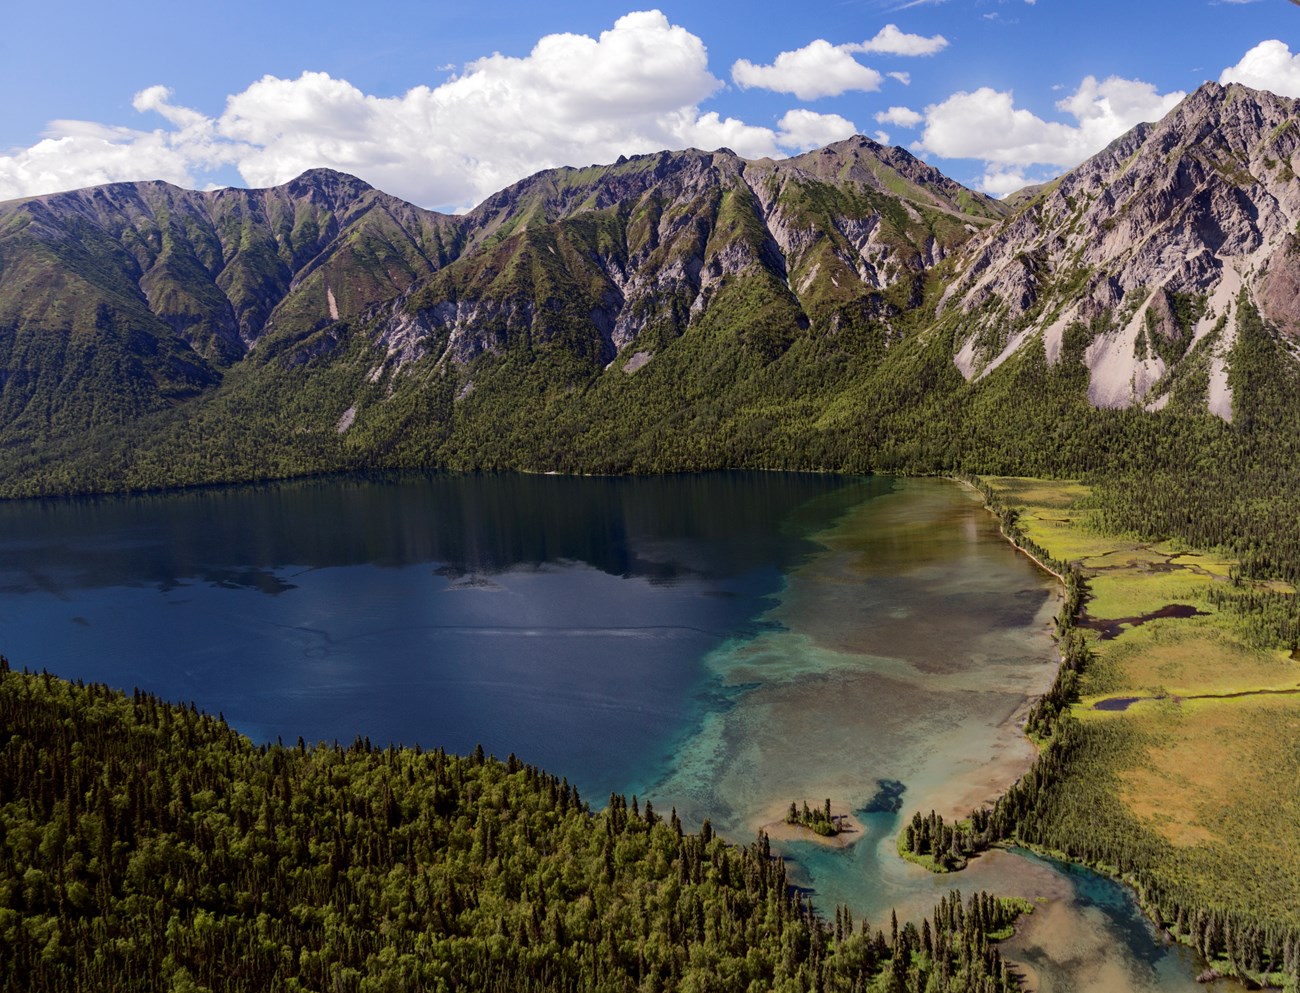 Aerial view of lake surrounded by mountains.